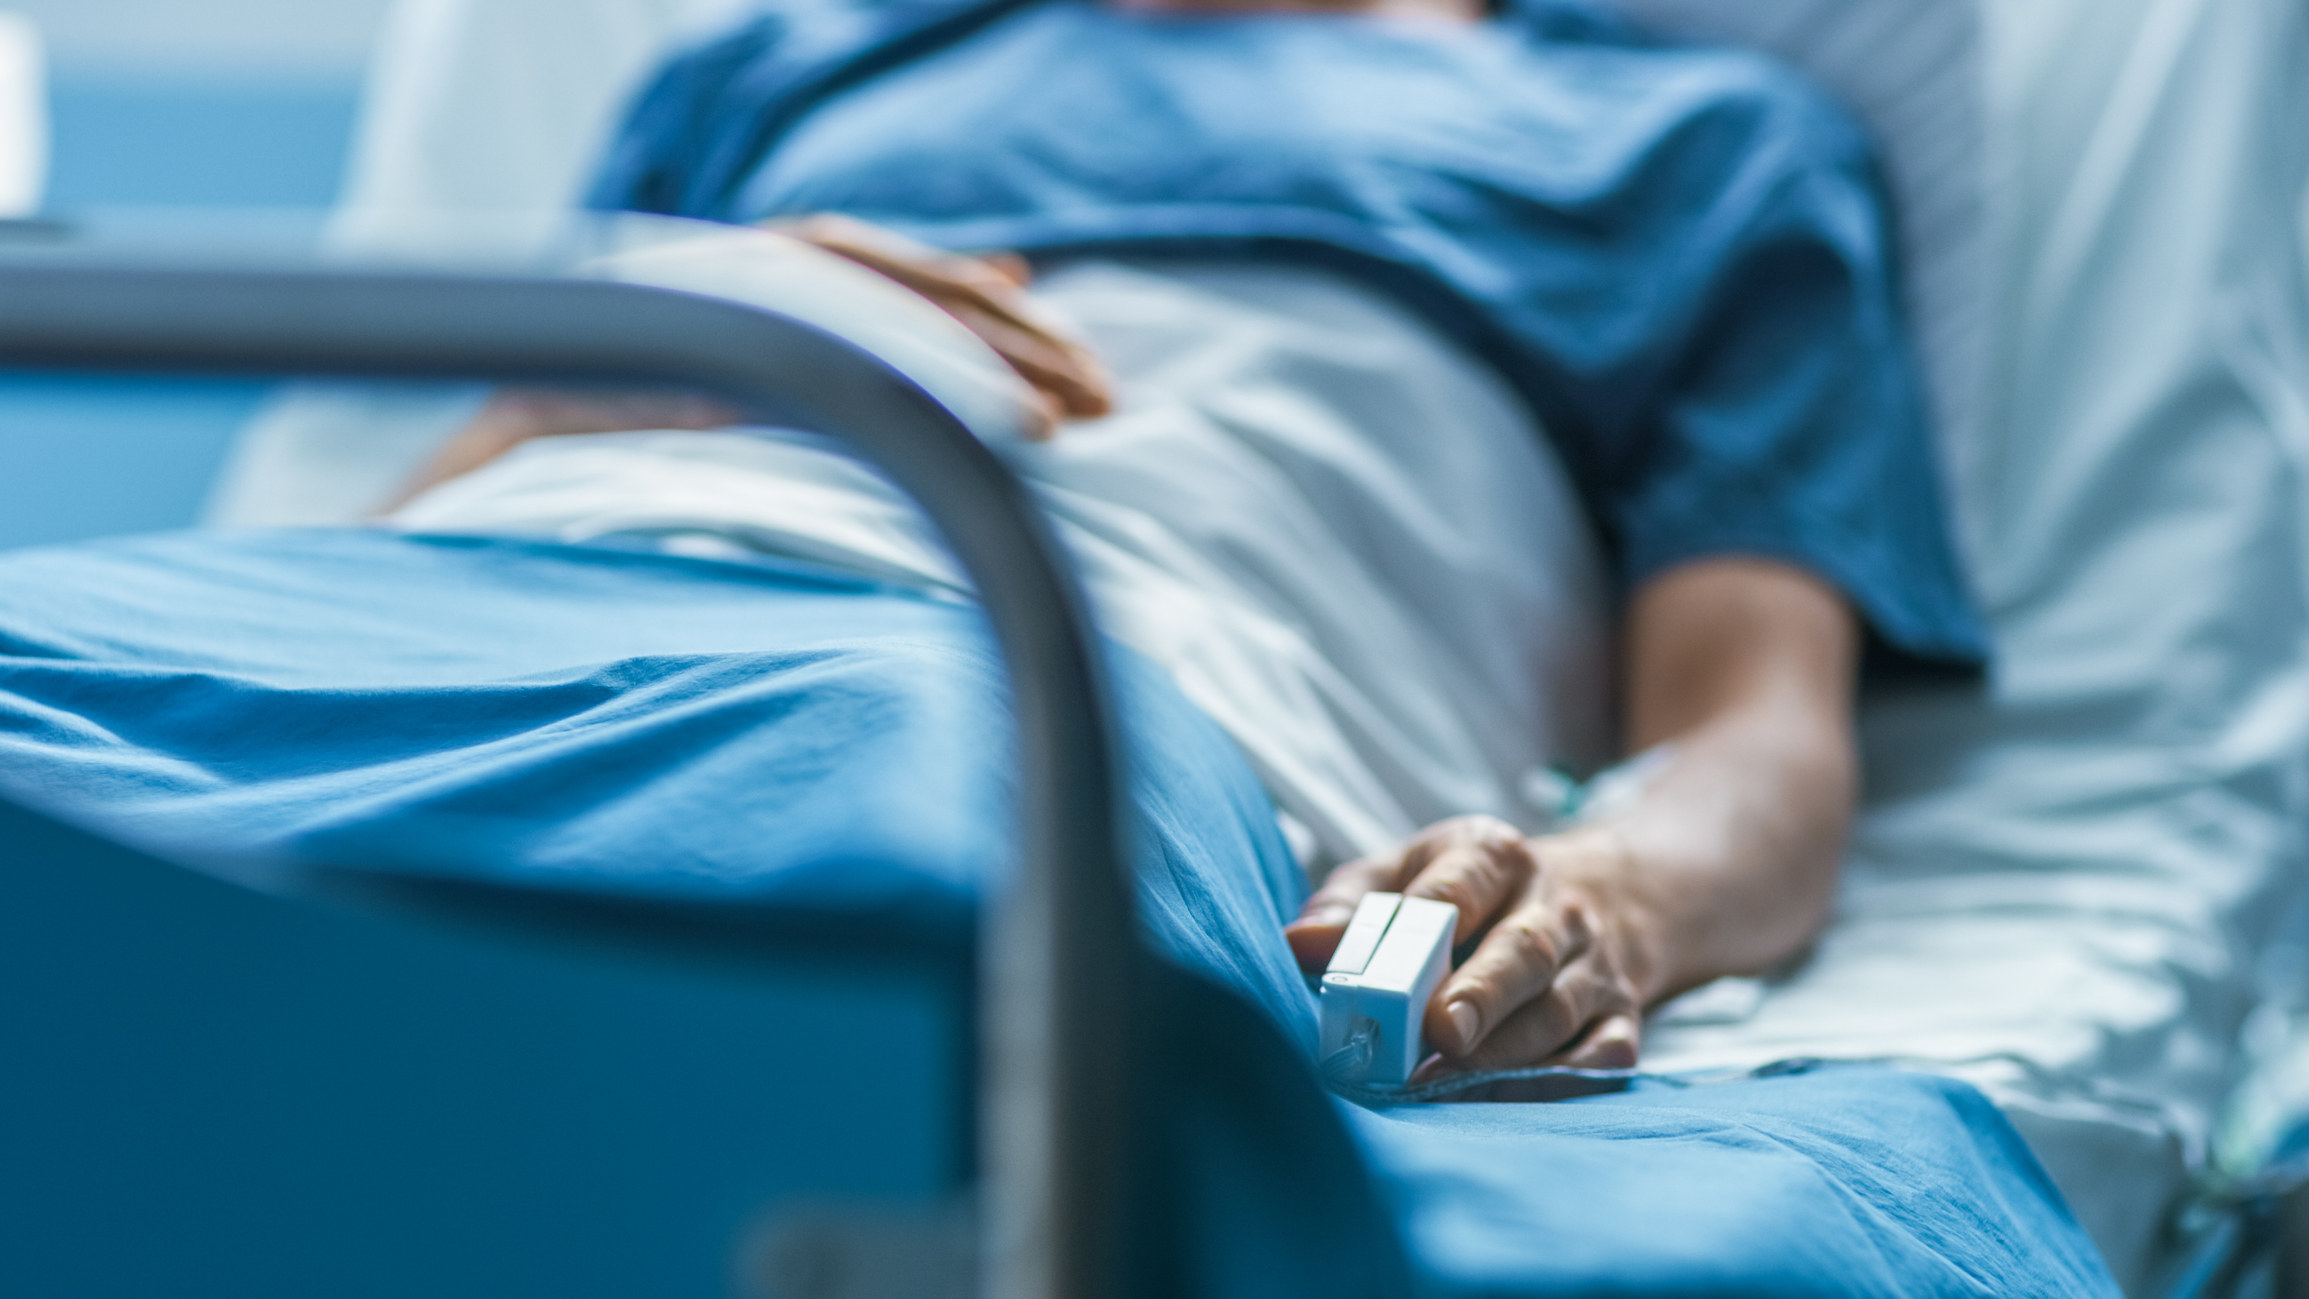 A stock image of a patient lying in a hospital bed